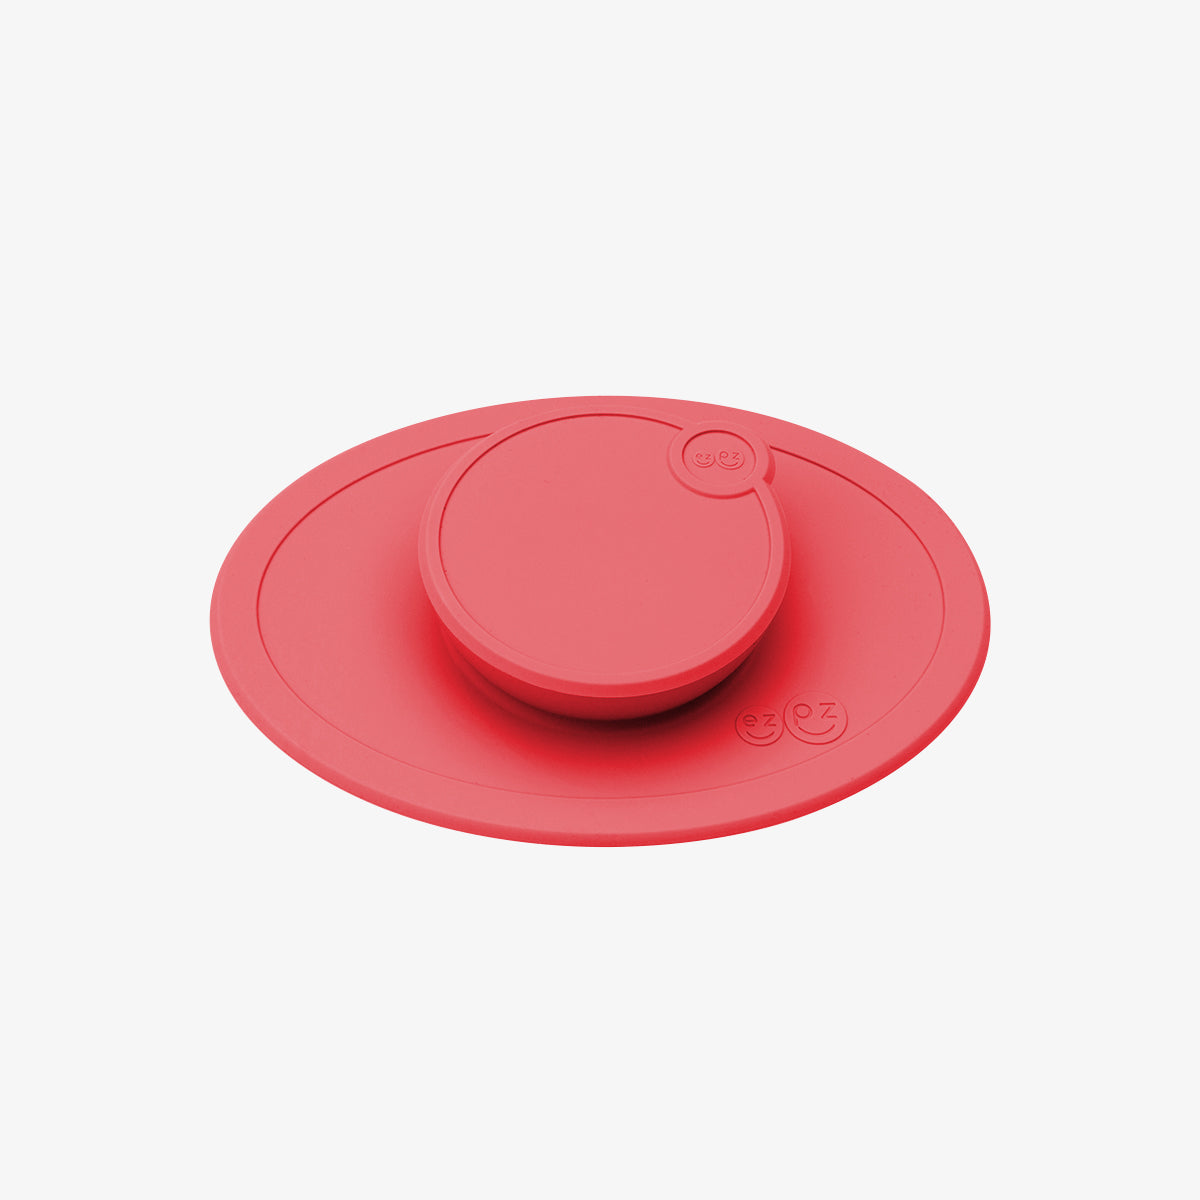 Tiny Bowl Lid in Coral / Storage Lids for the Tiny Bowl by ezpz / Silicone Lid for Baby Bowl